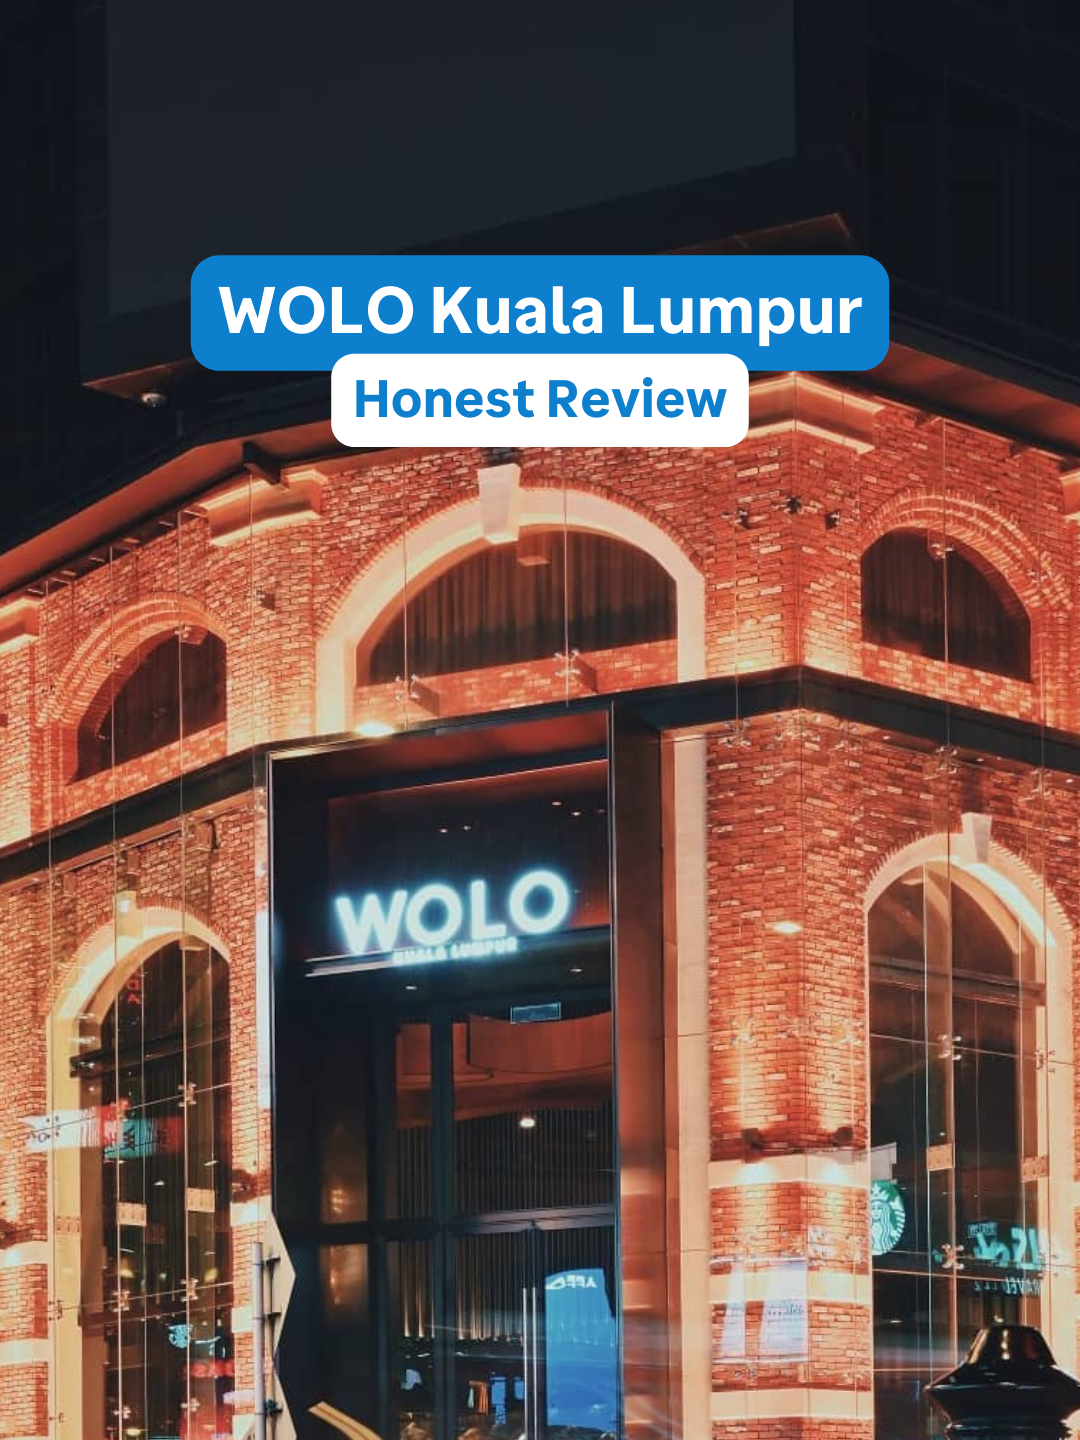 Cik Loka suka tengok @Itsmiamore punya honest review about WOLO Kuala Lumpur! Btw, ramai tanya mana nak parking. Paling dekat memang Lot 10 punya parking tau.  Tak silap they ada provide a flat rate if you park there. Boleh try tanya pihak WOLO for more information 😉 Btw, our 6.6 sale is coming! So make sure to check out Traveloka Apps for more goodies. #TravelokaMY #TravelCrazy #HotelHunting #HotelKualaLumpur #WOLO